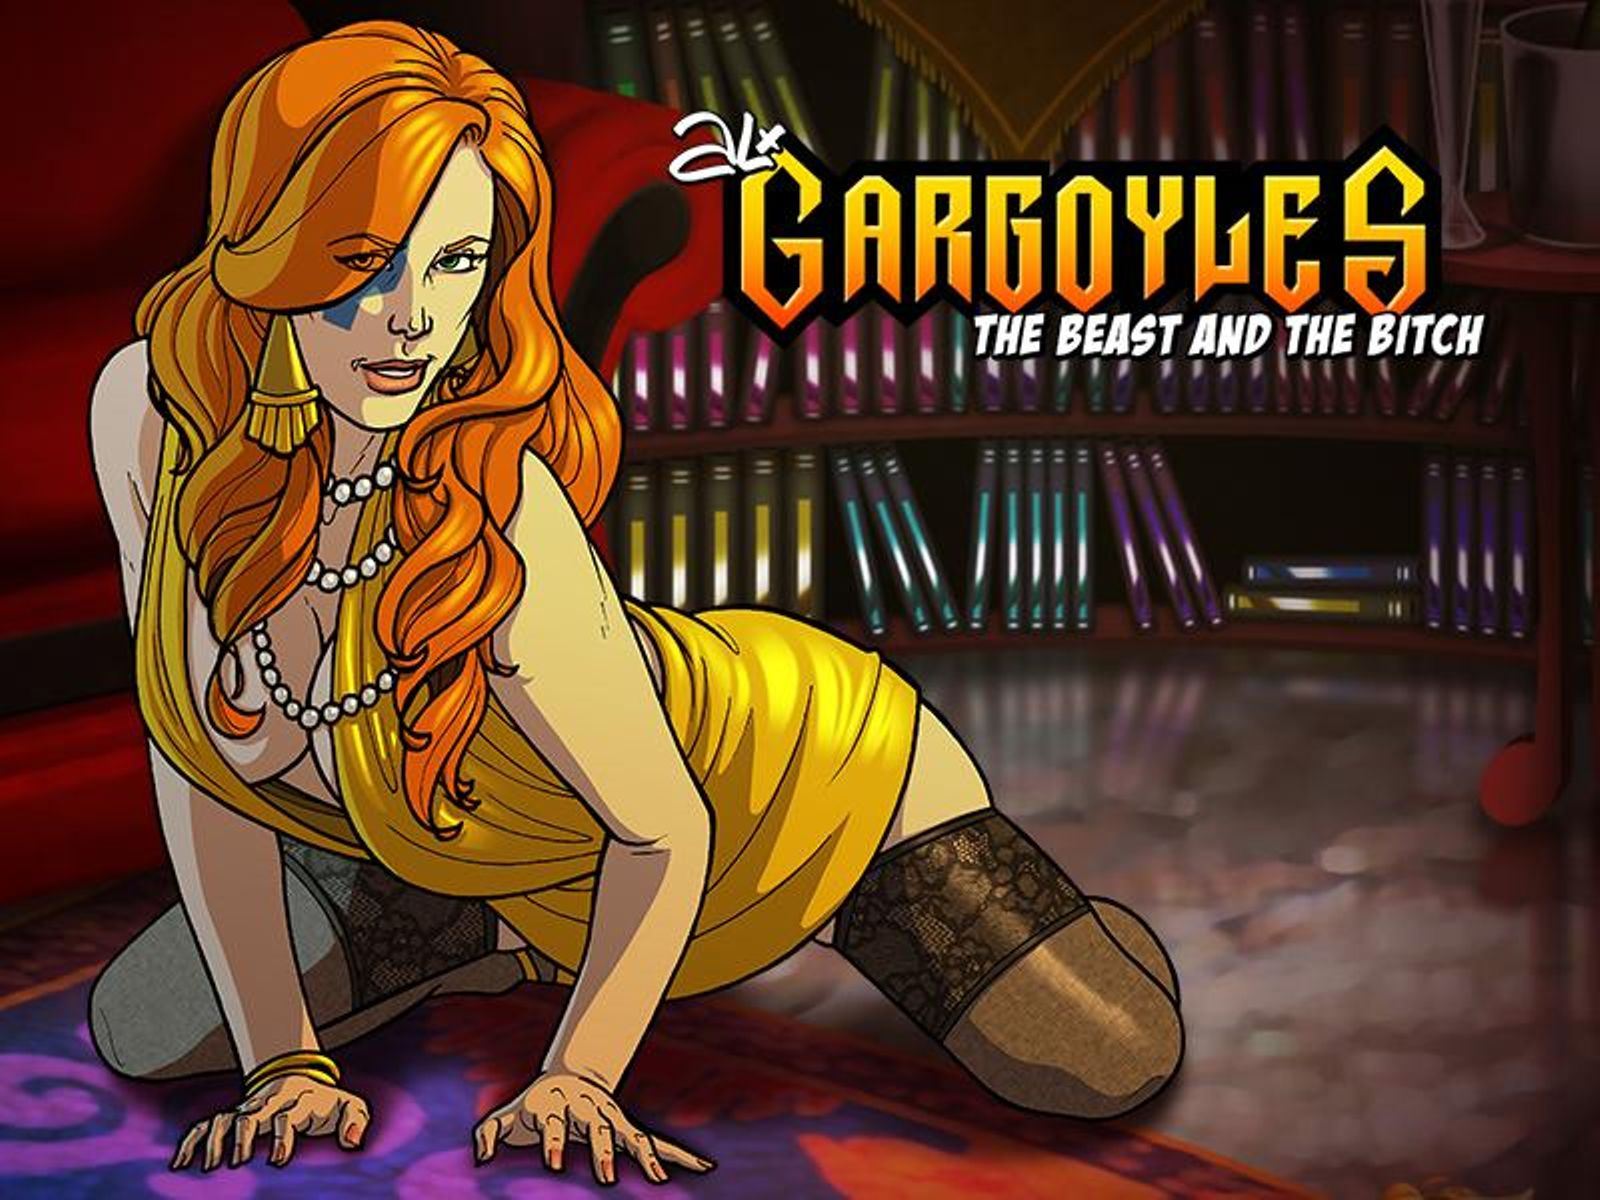 Ren'py] Gargoyles, The beast and the Bitch - v1.02 by Alx & Khronos 18+  Adult xxx Porn Game Download